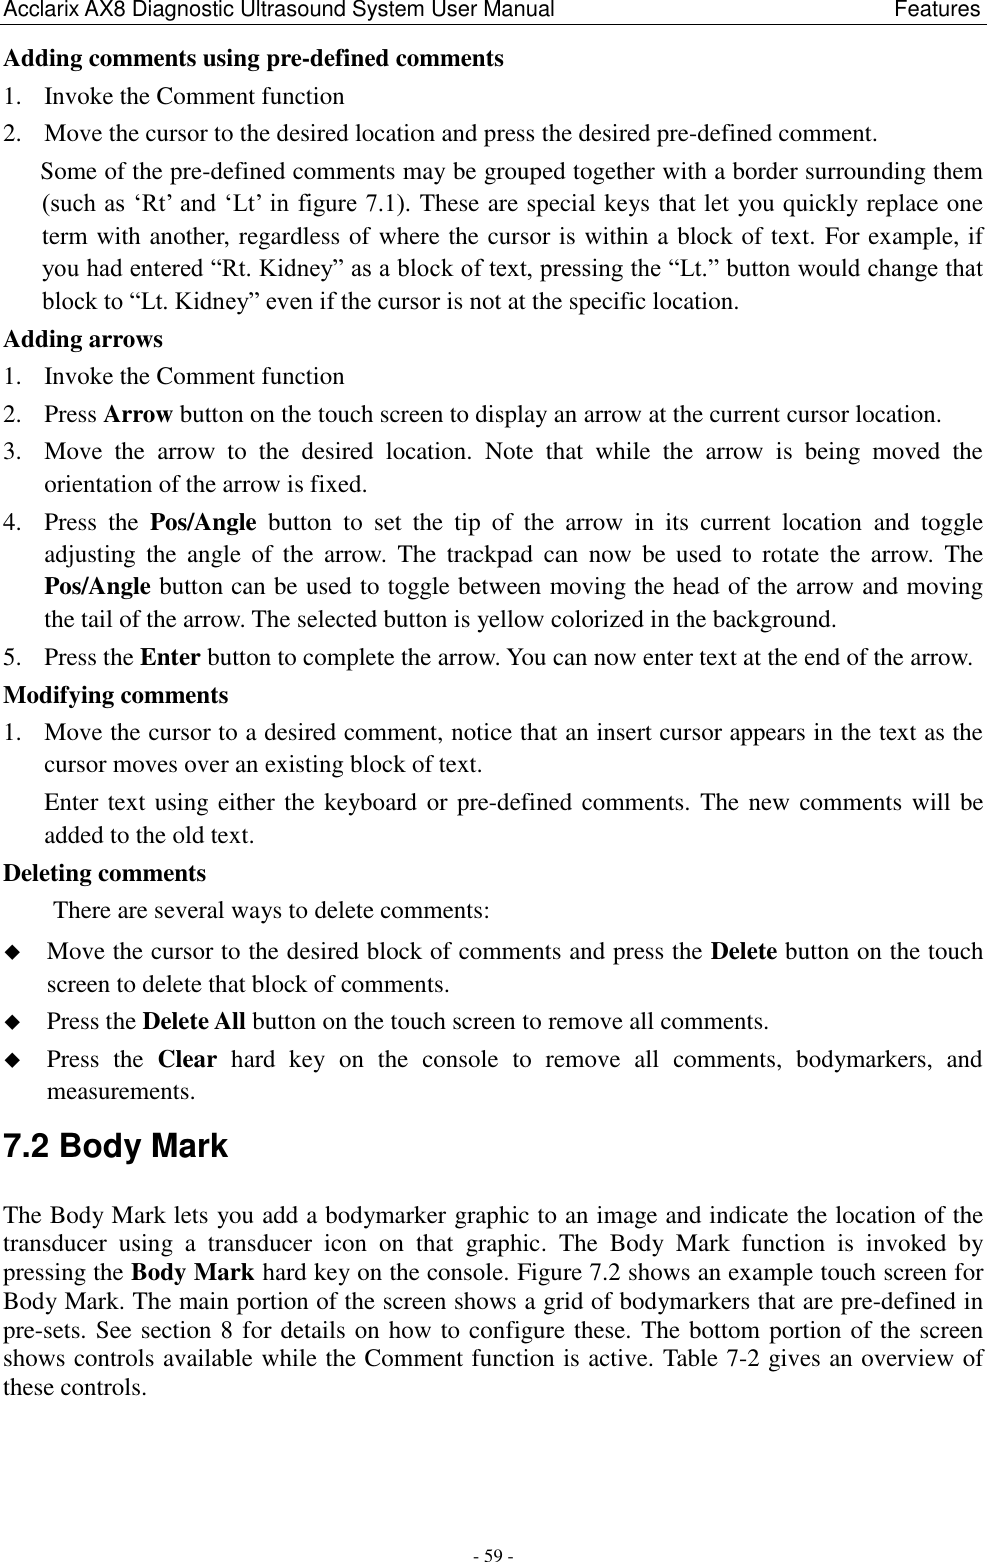 Acclarix AX8 Diagnostic Ultrasound System User Manual                                                              Features - 59 - Adding comments using pre-defined comments 1. Invoke the Comment function 2. Move the cursor to the desired location and press the desired pre-defined comment. Some of the pre-defined comments may be grouped together with a border surrounding them (such as „Rt‟ and „Lt‟ in figure 7.1). These are special keys that let you quickly replace one term with another, regardless of where the cursor is within a block of text. For example, if you had entered “Rt. Kidney” as a block of text, pressing the “Lt.” button would change that block to “Lt. Kidney” even if the cursor is not at the specific location. Adding arrows 1. Invoke the Comment function 2. Press Arrow button on the touch screen to display an arrow at the current cursor location. 3. Move  the  arrow  to  the  desired  location.  Note  that  while  the  arrow  is  being  moved  the orientation of the arrow is fixed. 4. Press  the  Pos/Angle  button  to  set  the  tip  of  the  arrow  in  its  current  location  and  toggle adjusting  the  angle  of  the  arrow.  The  trackpad  can  now  be  used  to  rotate  the  arrow.  The Pos/Angle button can be used to toggle between moving the head of the arrow and moving the tail of the arrow. The selected button is yellow colorized in the background.   5. Press the Enter button to complete the arrow. You can now enter text at the end of the arrow. Modifying comments 1. Move the cursor to a desired comment, notice that an insert cursor appears in the text as the cursor moves over an existing block of text. Enter text using either the keyboard or pre-defined comments. The new comments will be added to the old text. Deleting comments There are several ways to delete comments:  Move the cursor to the desired block of comments and press the Delete button on the touch screen to delete that block of comments.    Press the Delete All button on the touch screen to remove all comments.  Press  the  Clear  hard  key  on  the  console  to  remove  all  comments,  bodymarkers,  and measurements. 7.2 Body Mark The Body Mark lets you add a bodymarker graphic to an image and indicate the location of the transducer  using  a  transducer  icon  on  that  graphic.  The  Body  Mark  function  is  invoked  by pressing the Body Mark hard key on the console. Figure 7.2 shows an example touch screen for Body Mark. The main portion of the screen shows a grid of bodymarkers that are pre-defined in pre-sets. See section 8 for details on how to configure these. The bottom portion of the screen shows controls available while the Comment function is active. Table 7-2 gives an overview of these controls. 